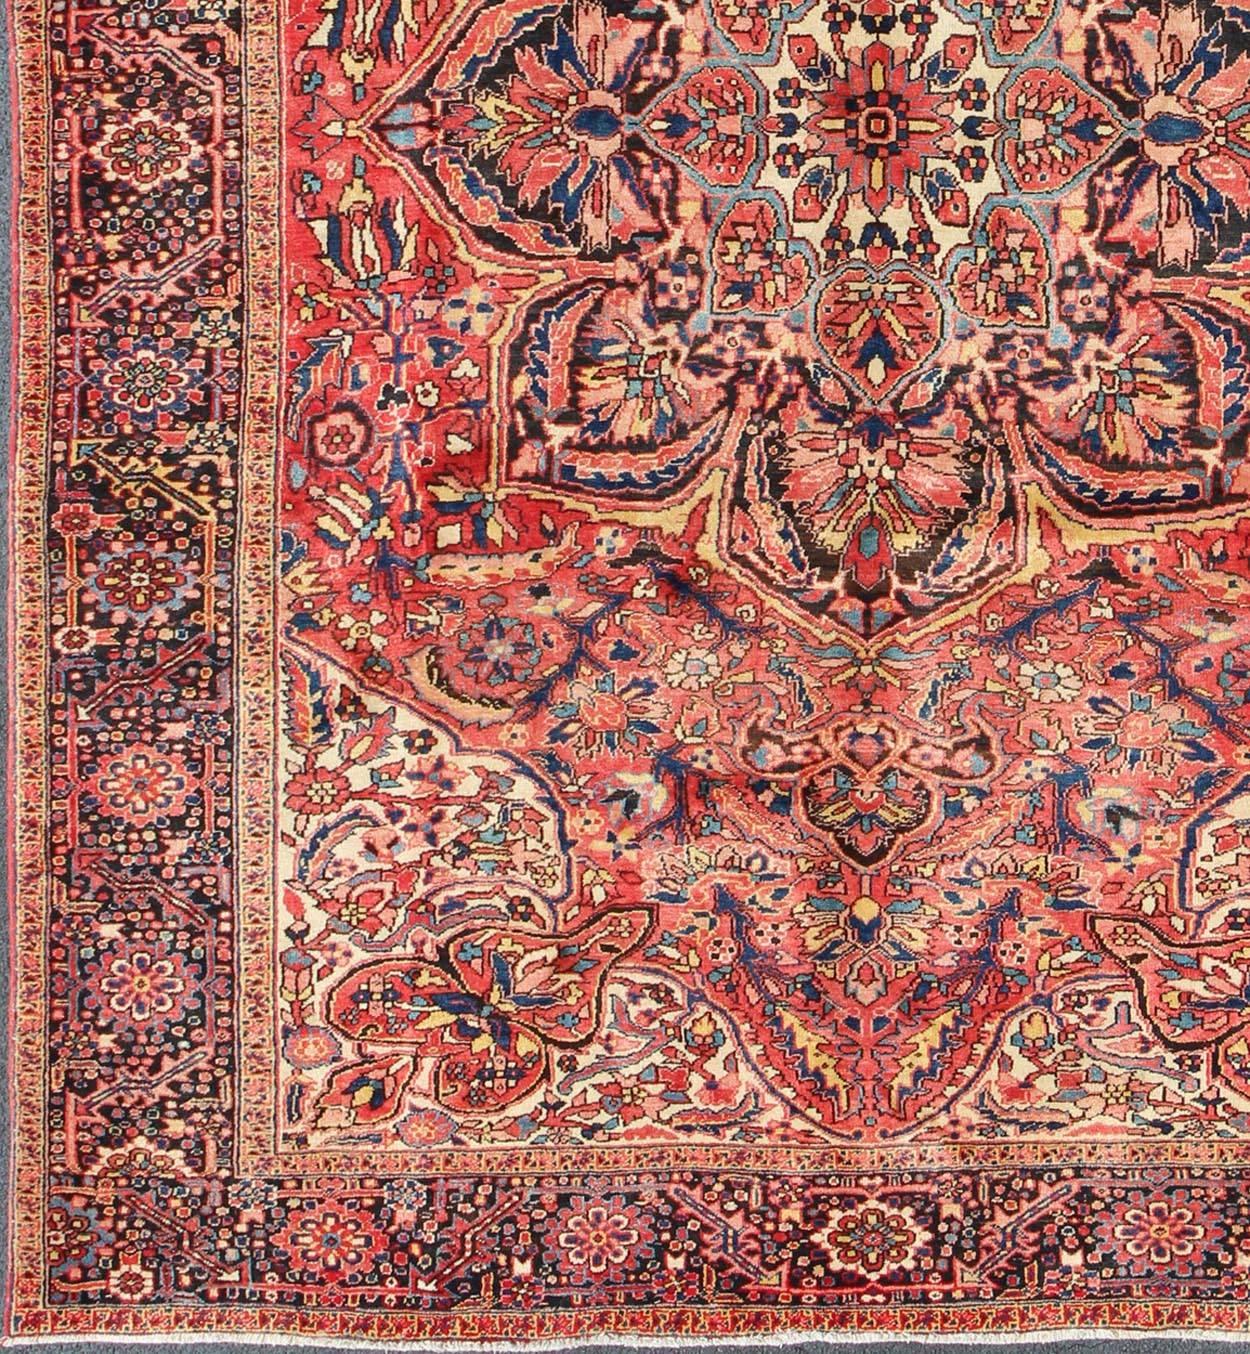 Soft reds and multi-color midcentury Persian Heriz rug with stylized medallion design, rug rm-m17420, country of origin / type: Iran / Heriz, circa 1950.

This magnificent antique Persian Heriz carpet from the mid-20th century (circa 1950) bears